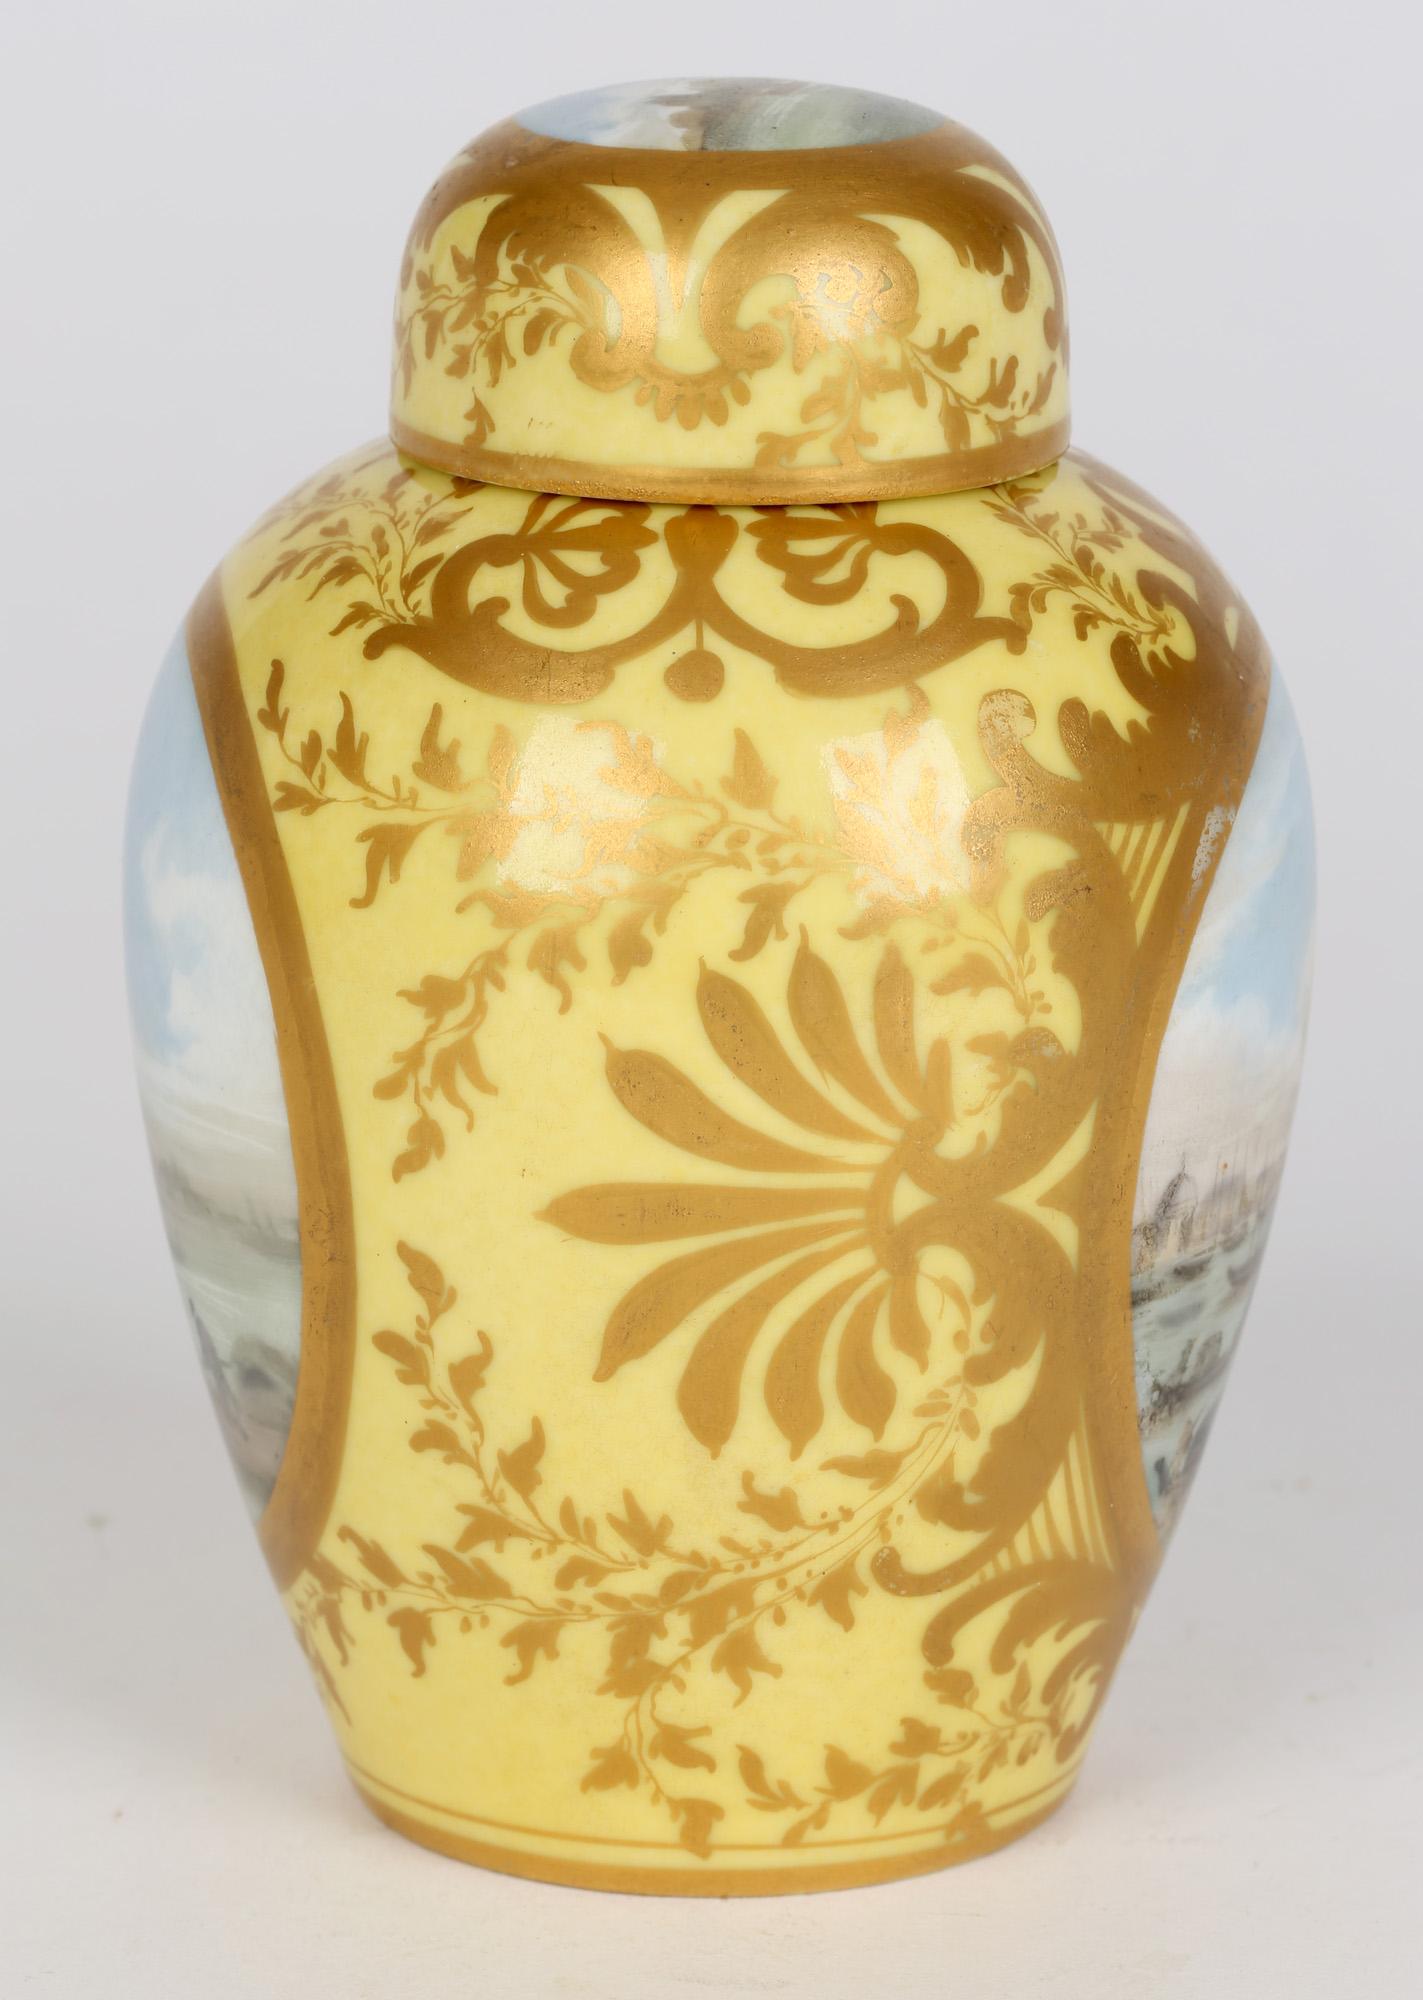 A French Paris porcelain lidded tea caddy applied with scenes of Venice set within a yellow ground dating from the latter 19th century. The rounded tea caddy has a narrow raised neck with a rounded domed cover. The body of the caddy is decorated